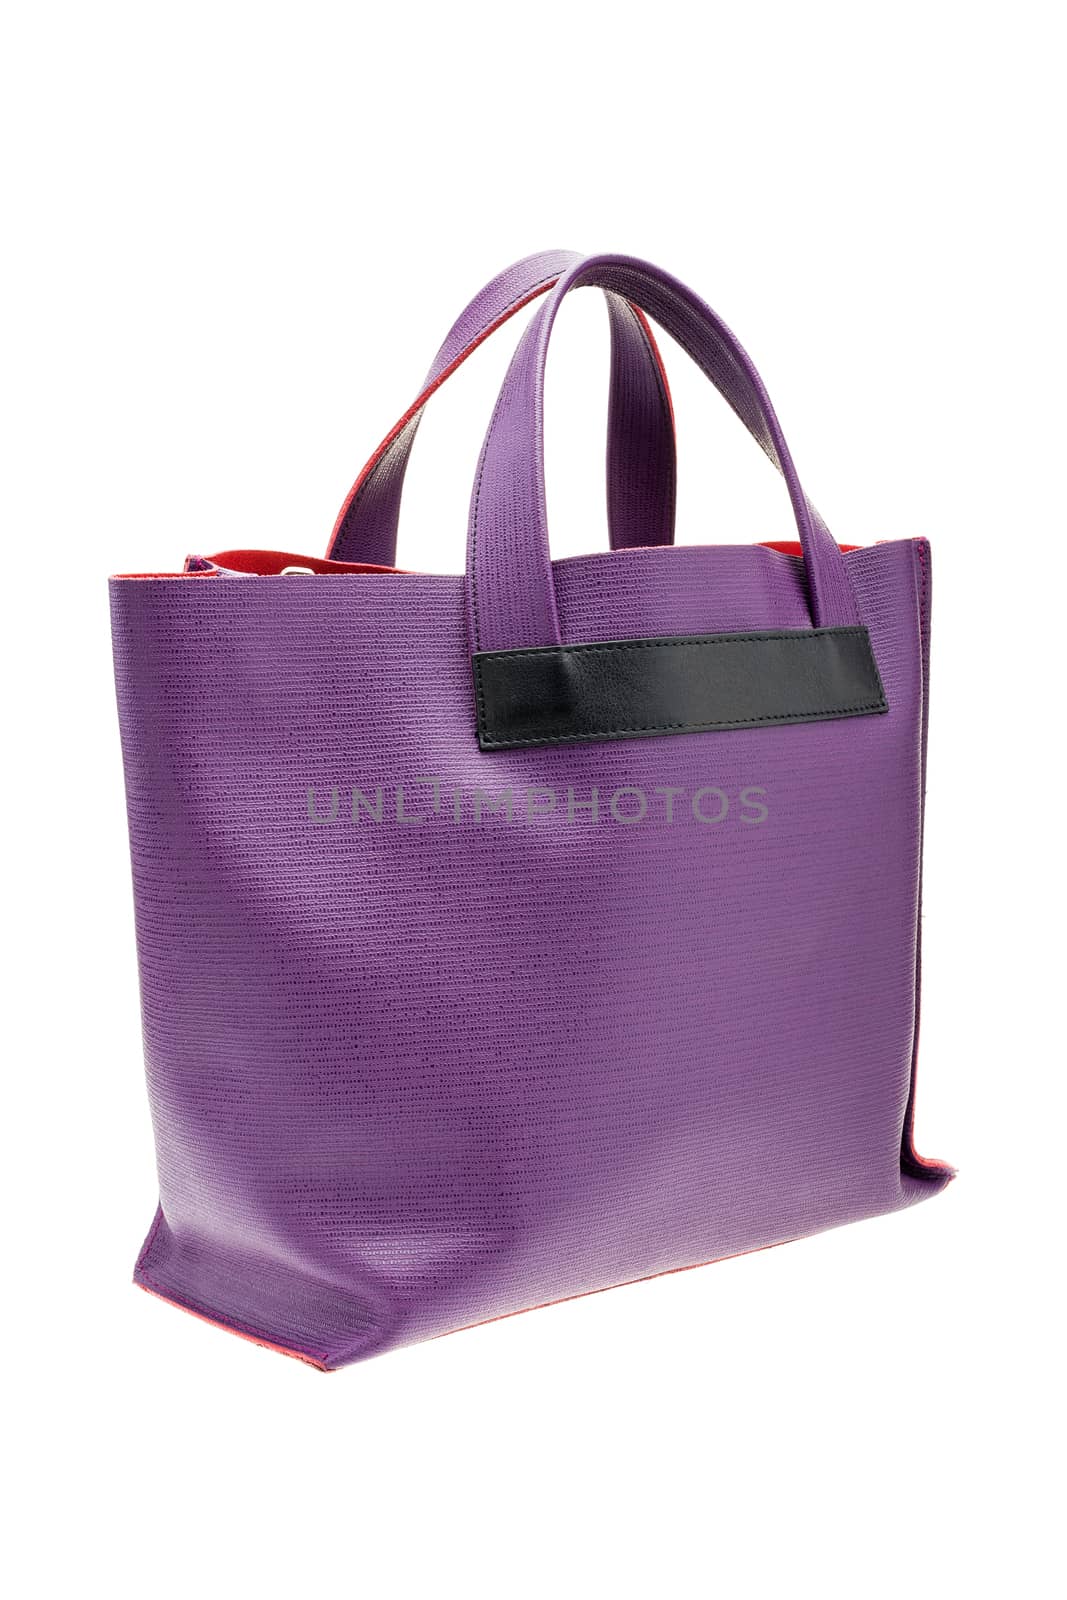 Violet womens bag isolated on white background. by igor_stramyk